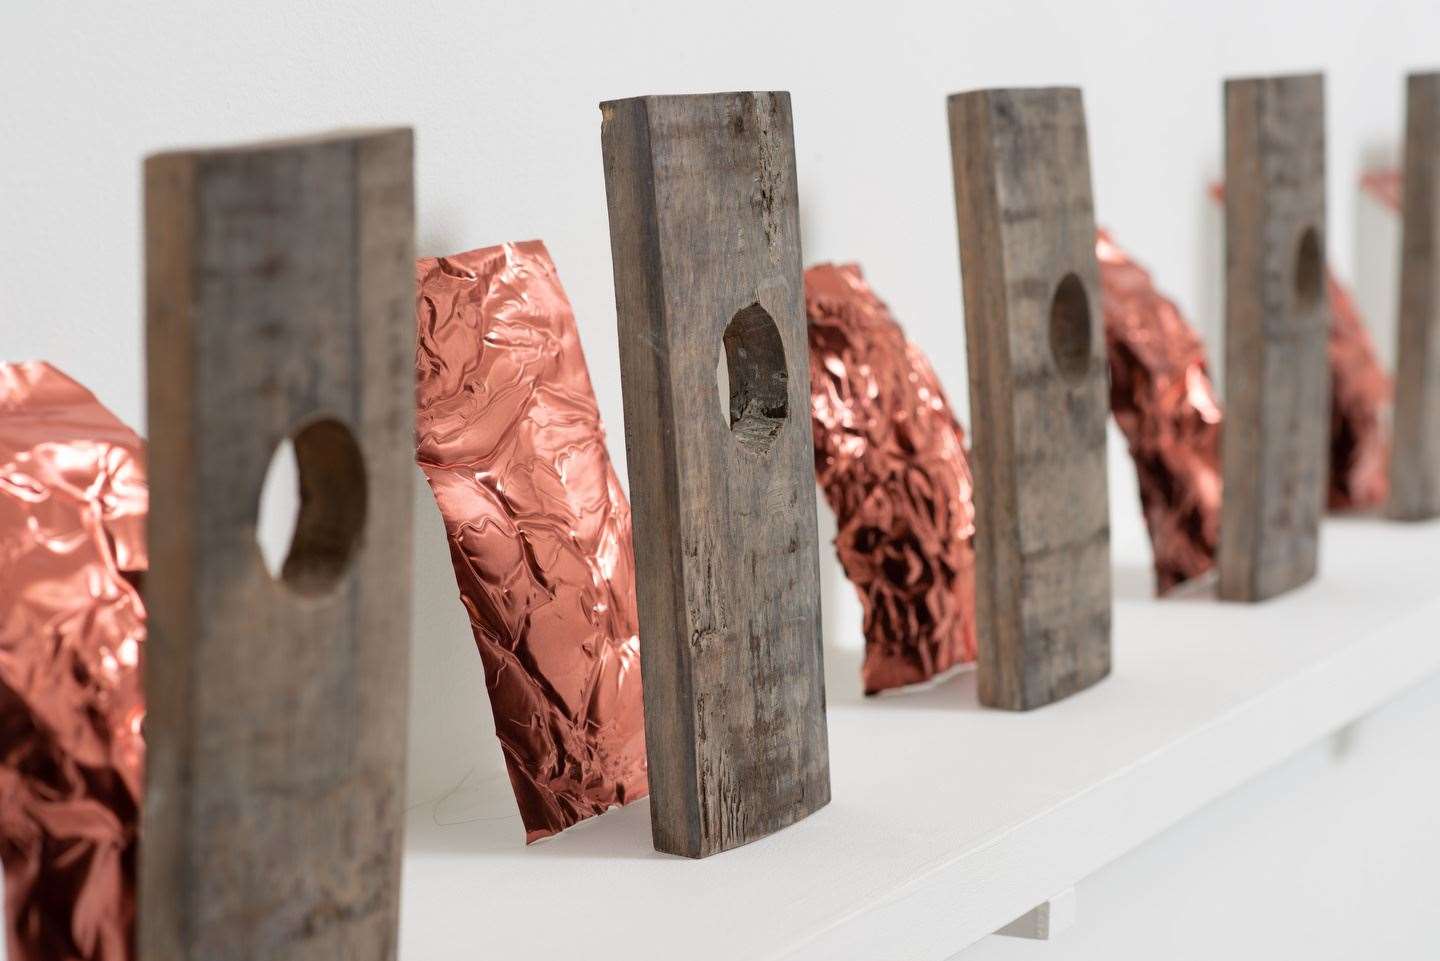 Kim Welch's 'Coppertones' forms part of 'Sounding Boards and Landing Boards' at ARI.